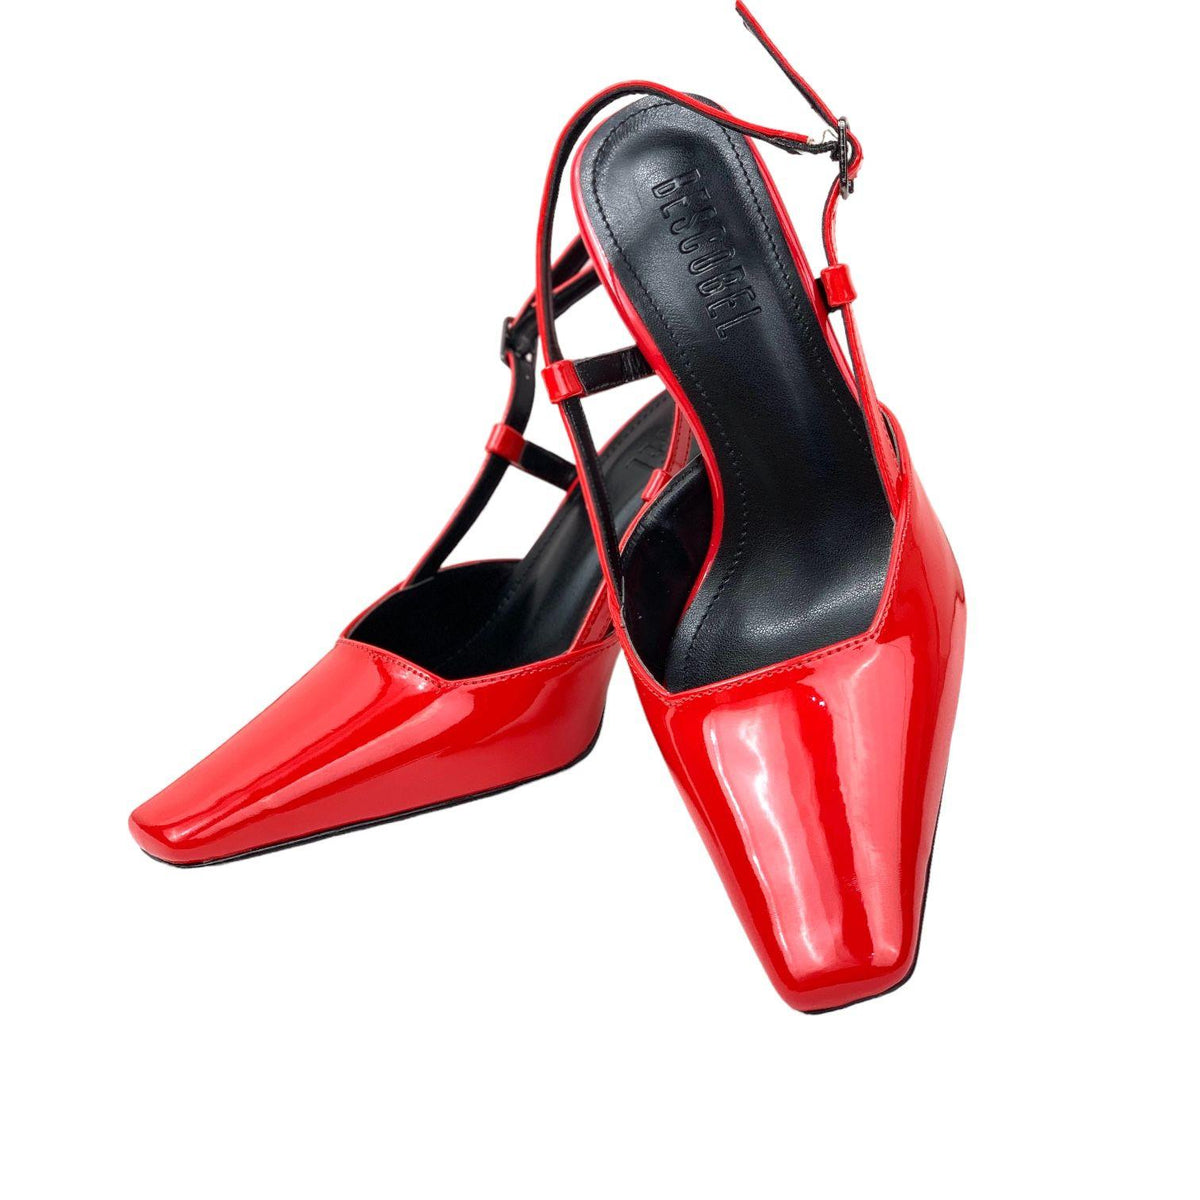 Women's Yojd Red Patent Leather Heeled Open Back Shoes 8 CM - STREETMODE™